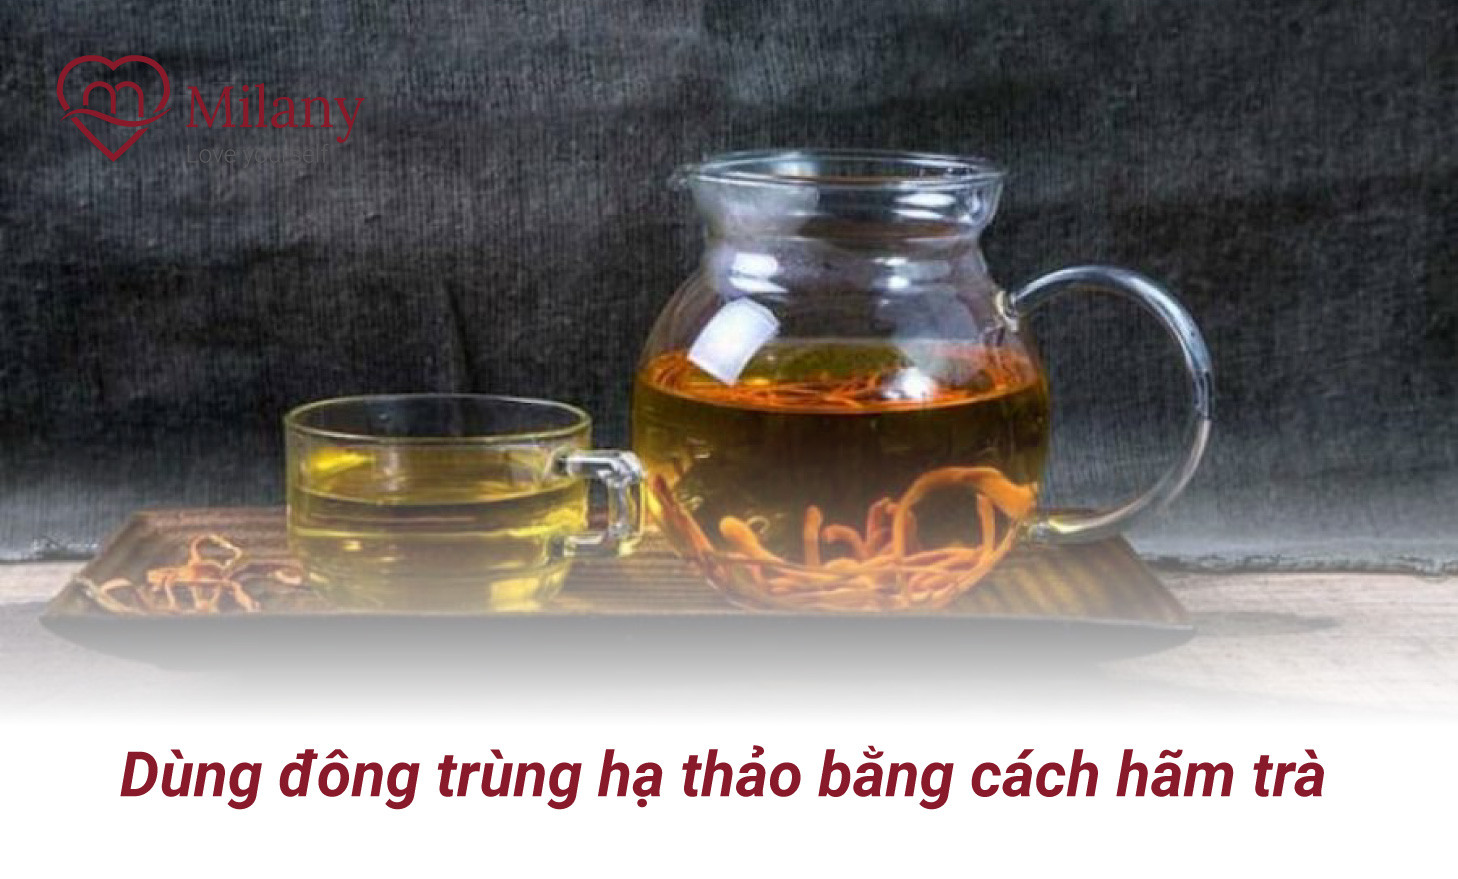 cach dung dong trung ha thao giam can